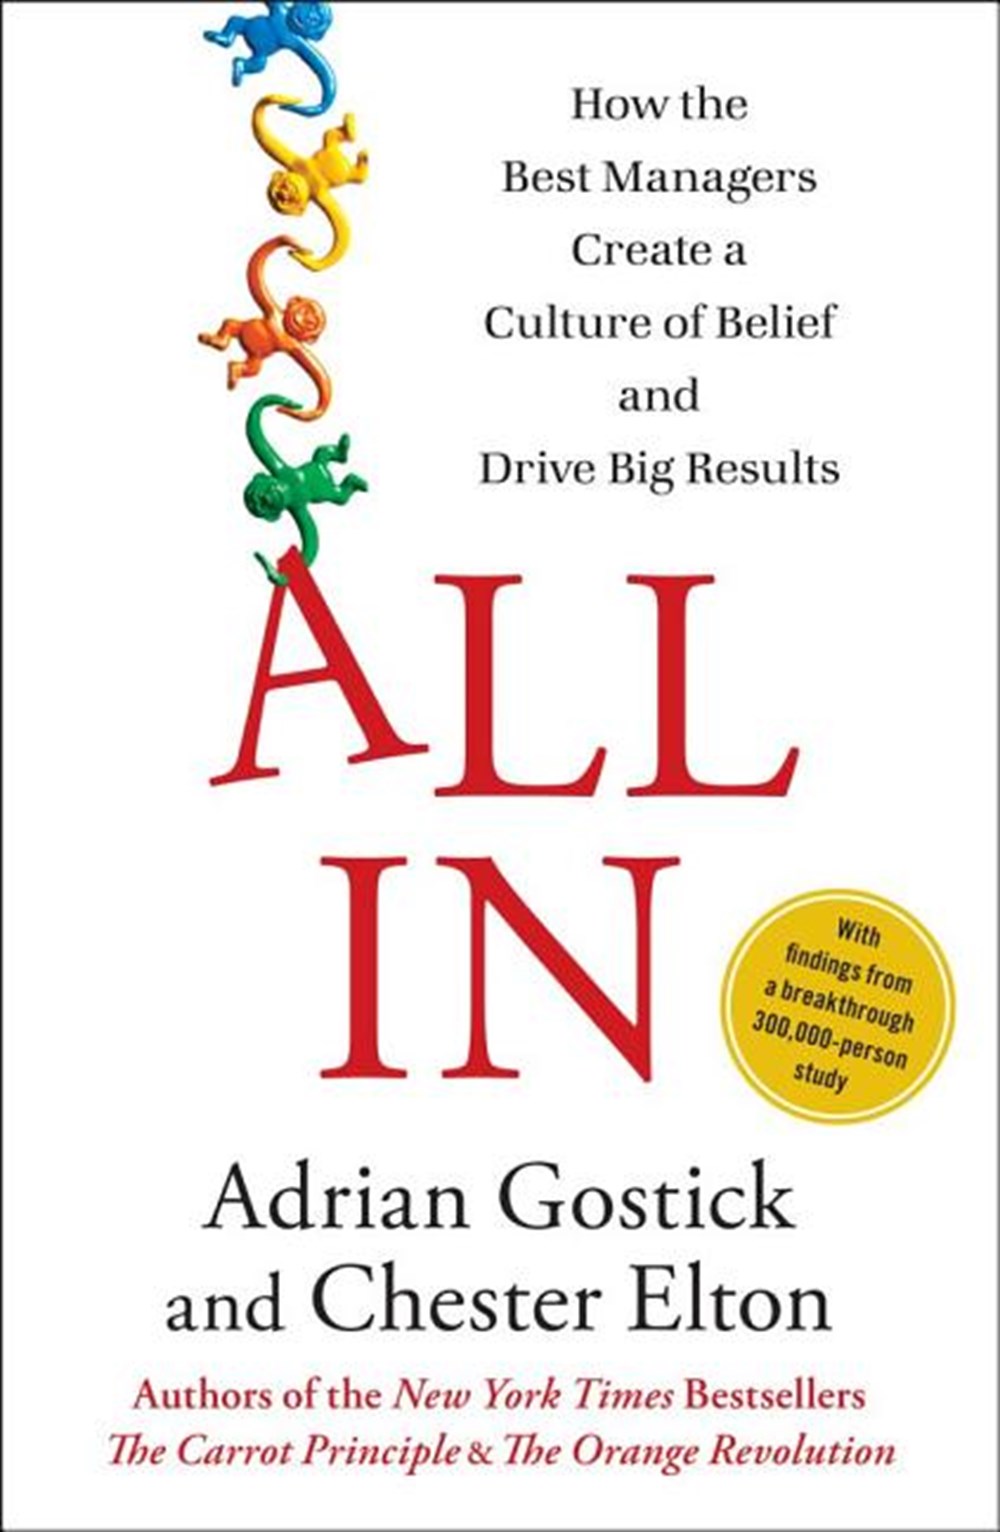 All in How the Best Managers Create a Culture of Belief and Drive Big Results